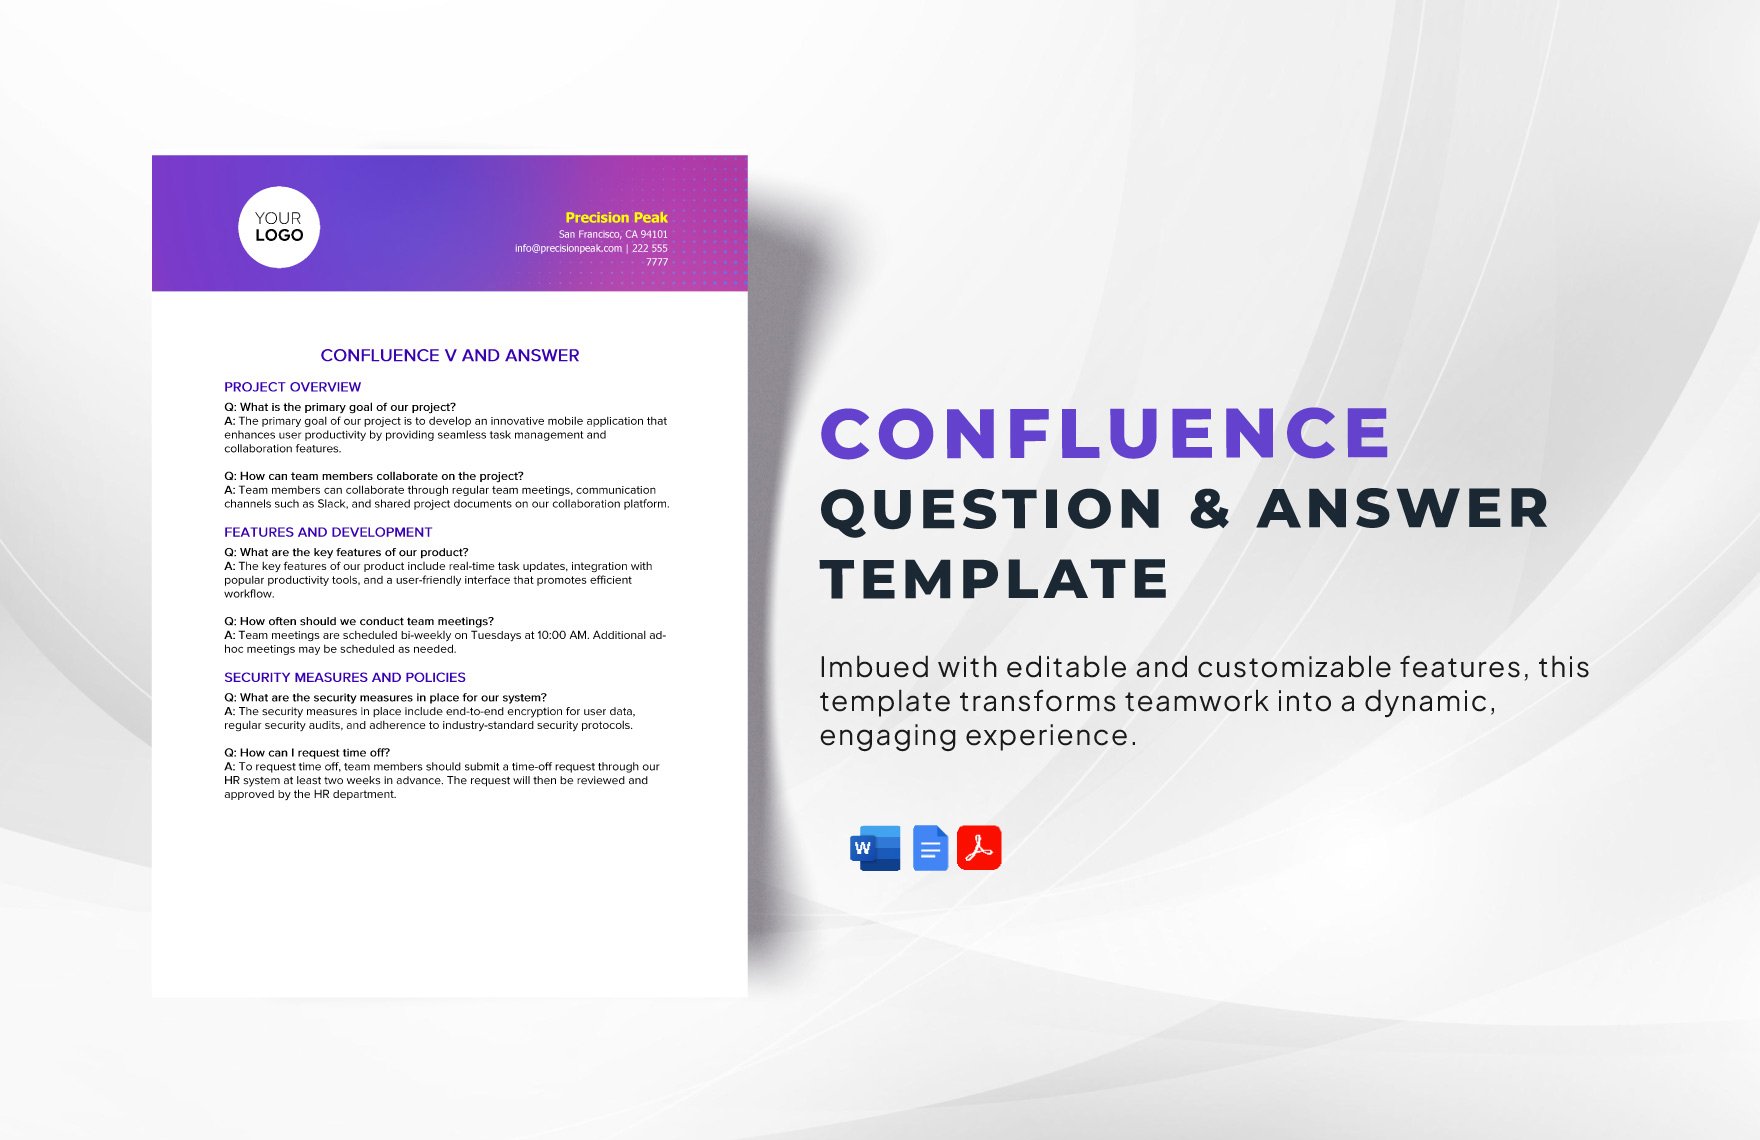 Confluence Question & Answer Template